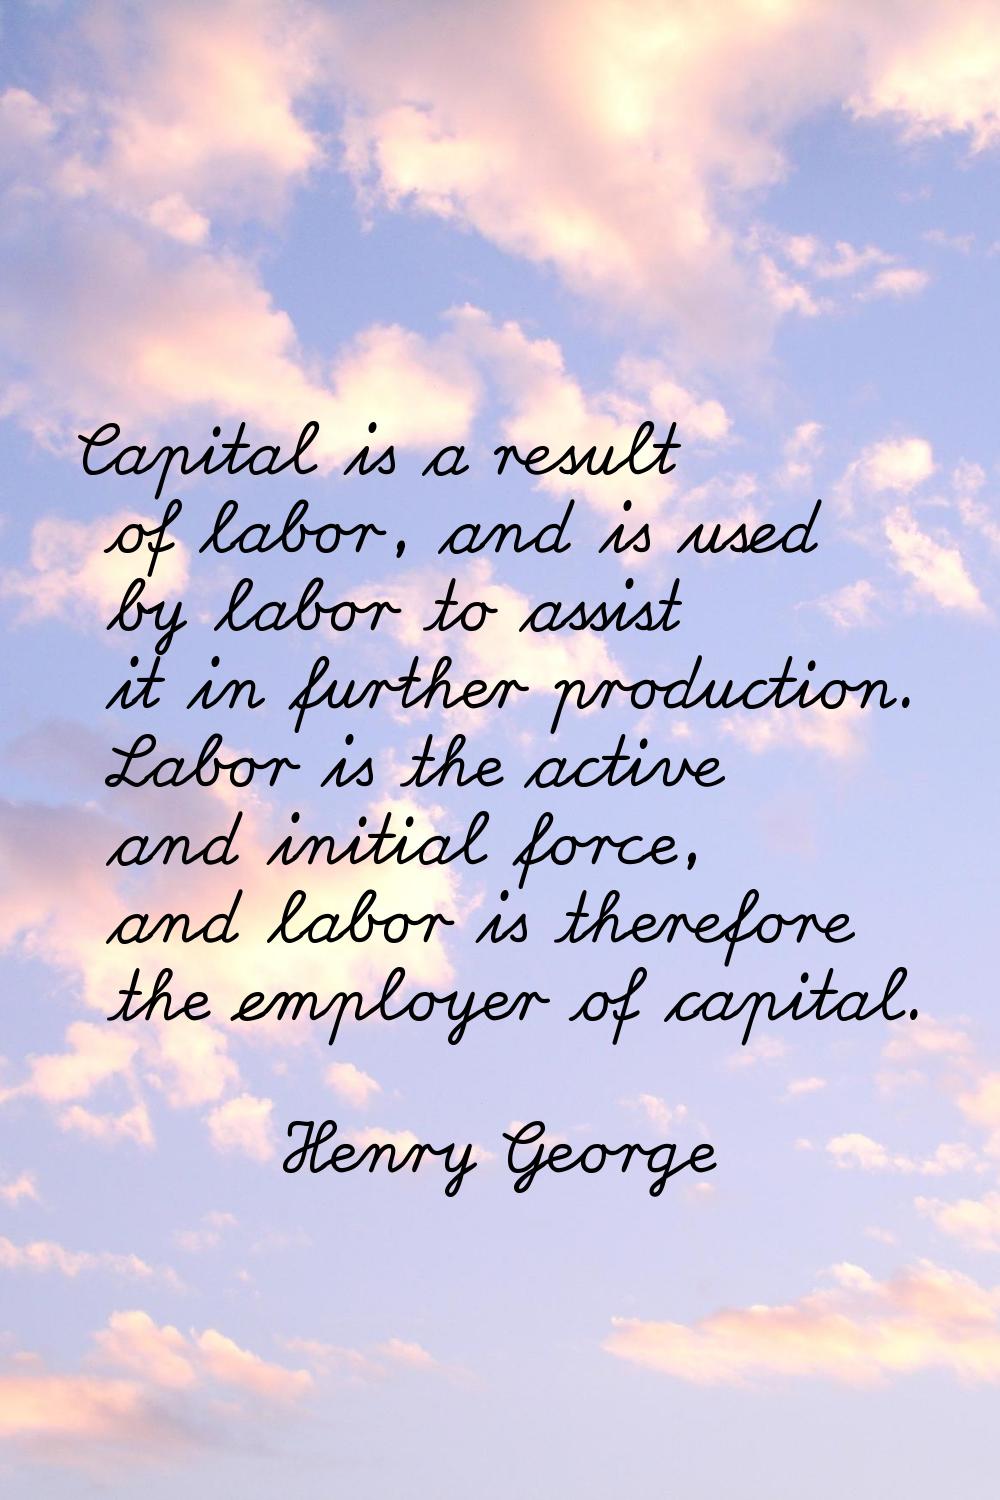 Capital is a result of labor, and is used by labor to assist it in further production. Labor is the